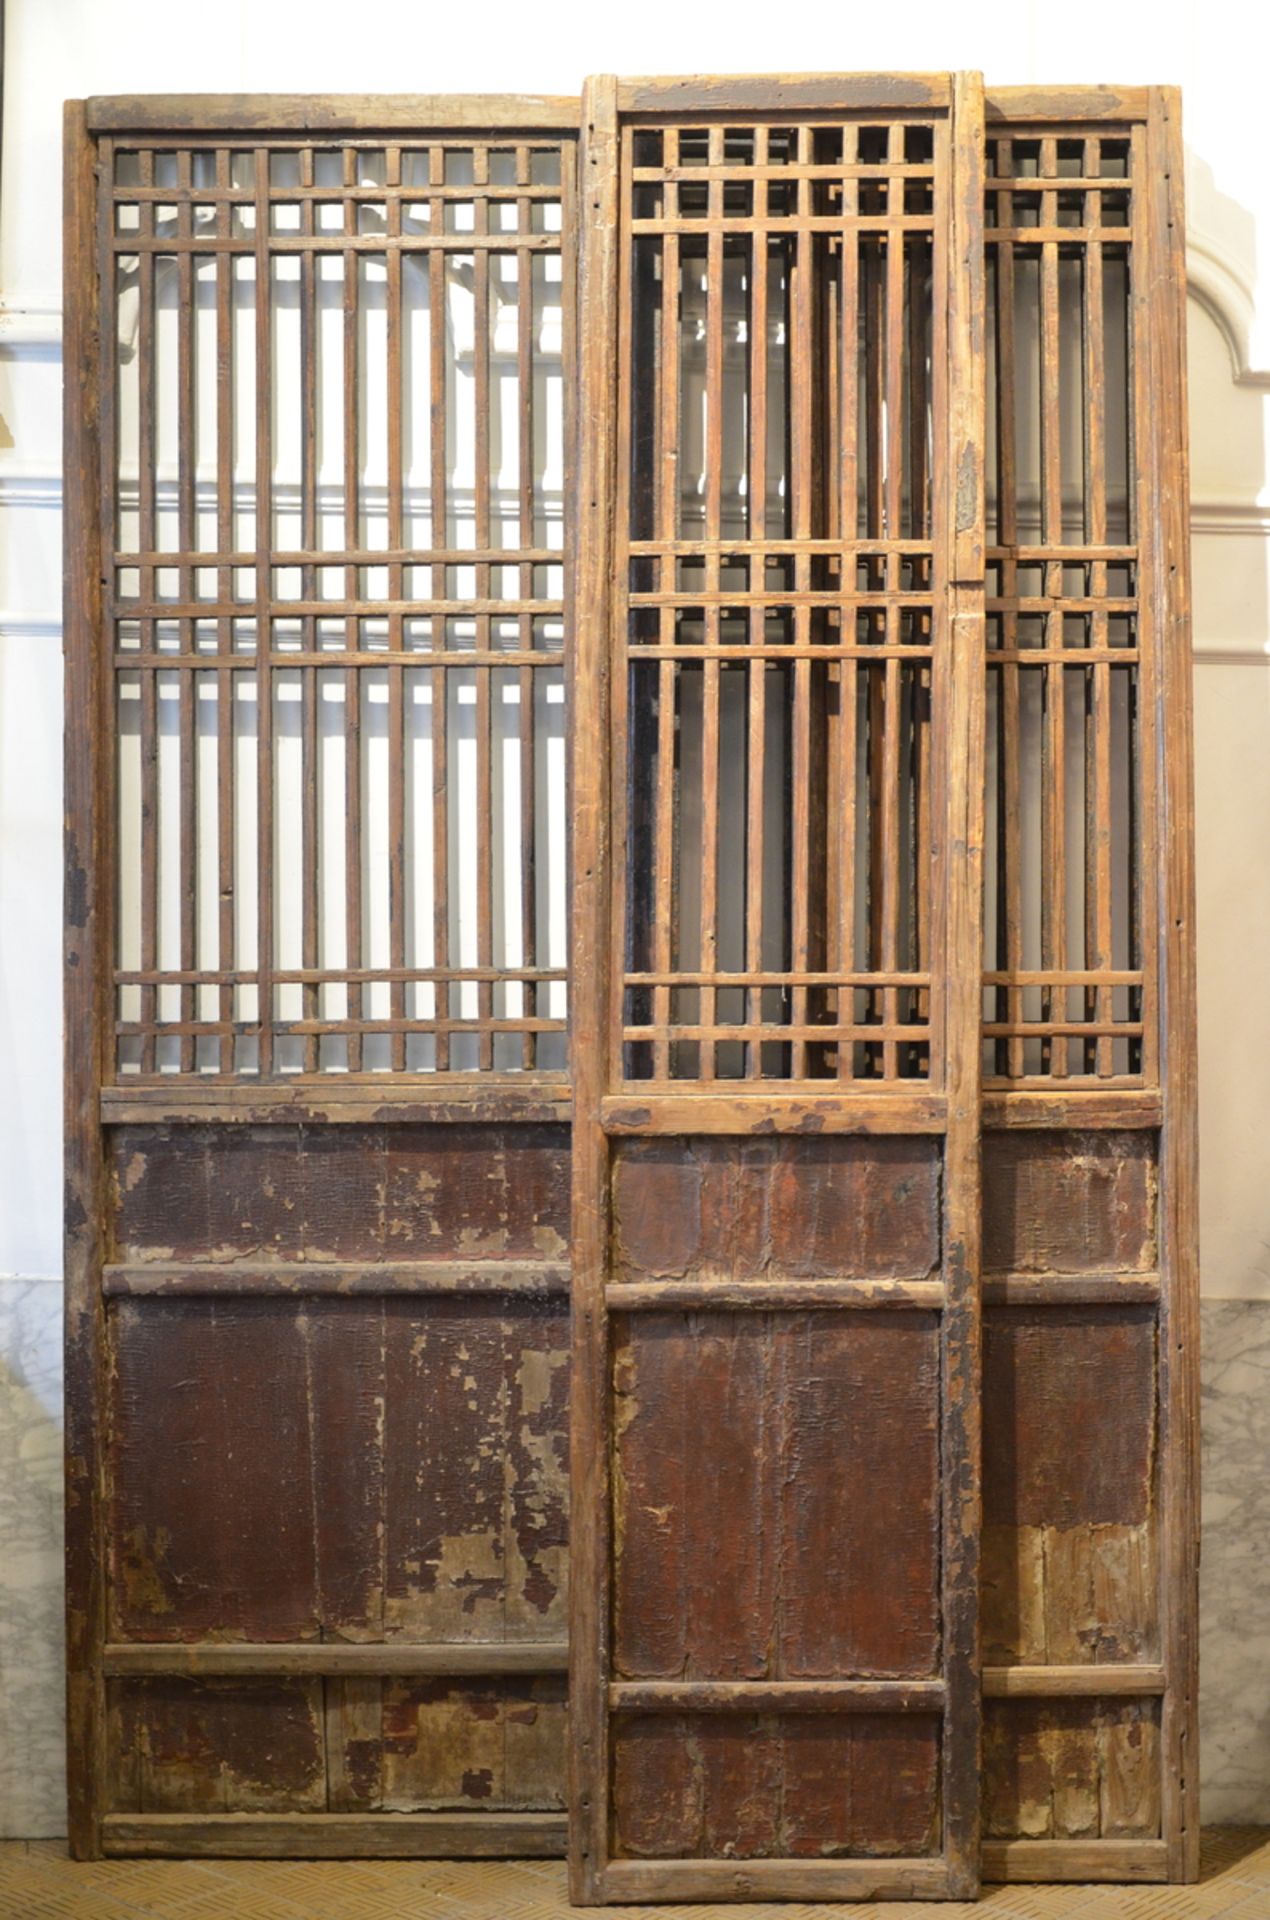 Set of 4 Chinese wooden screens - Image 2 of 3